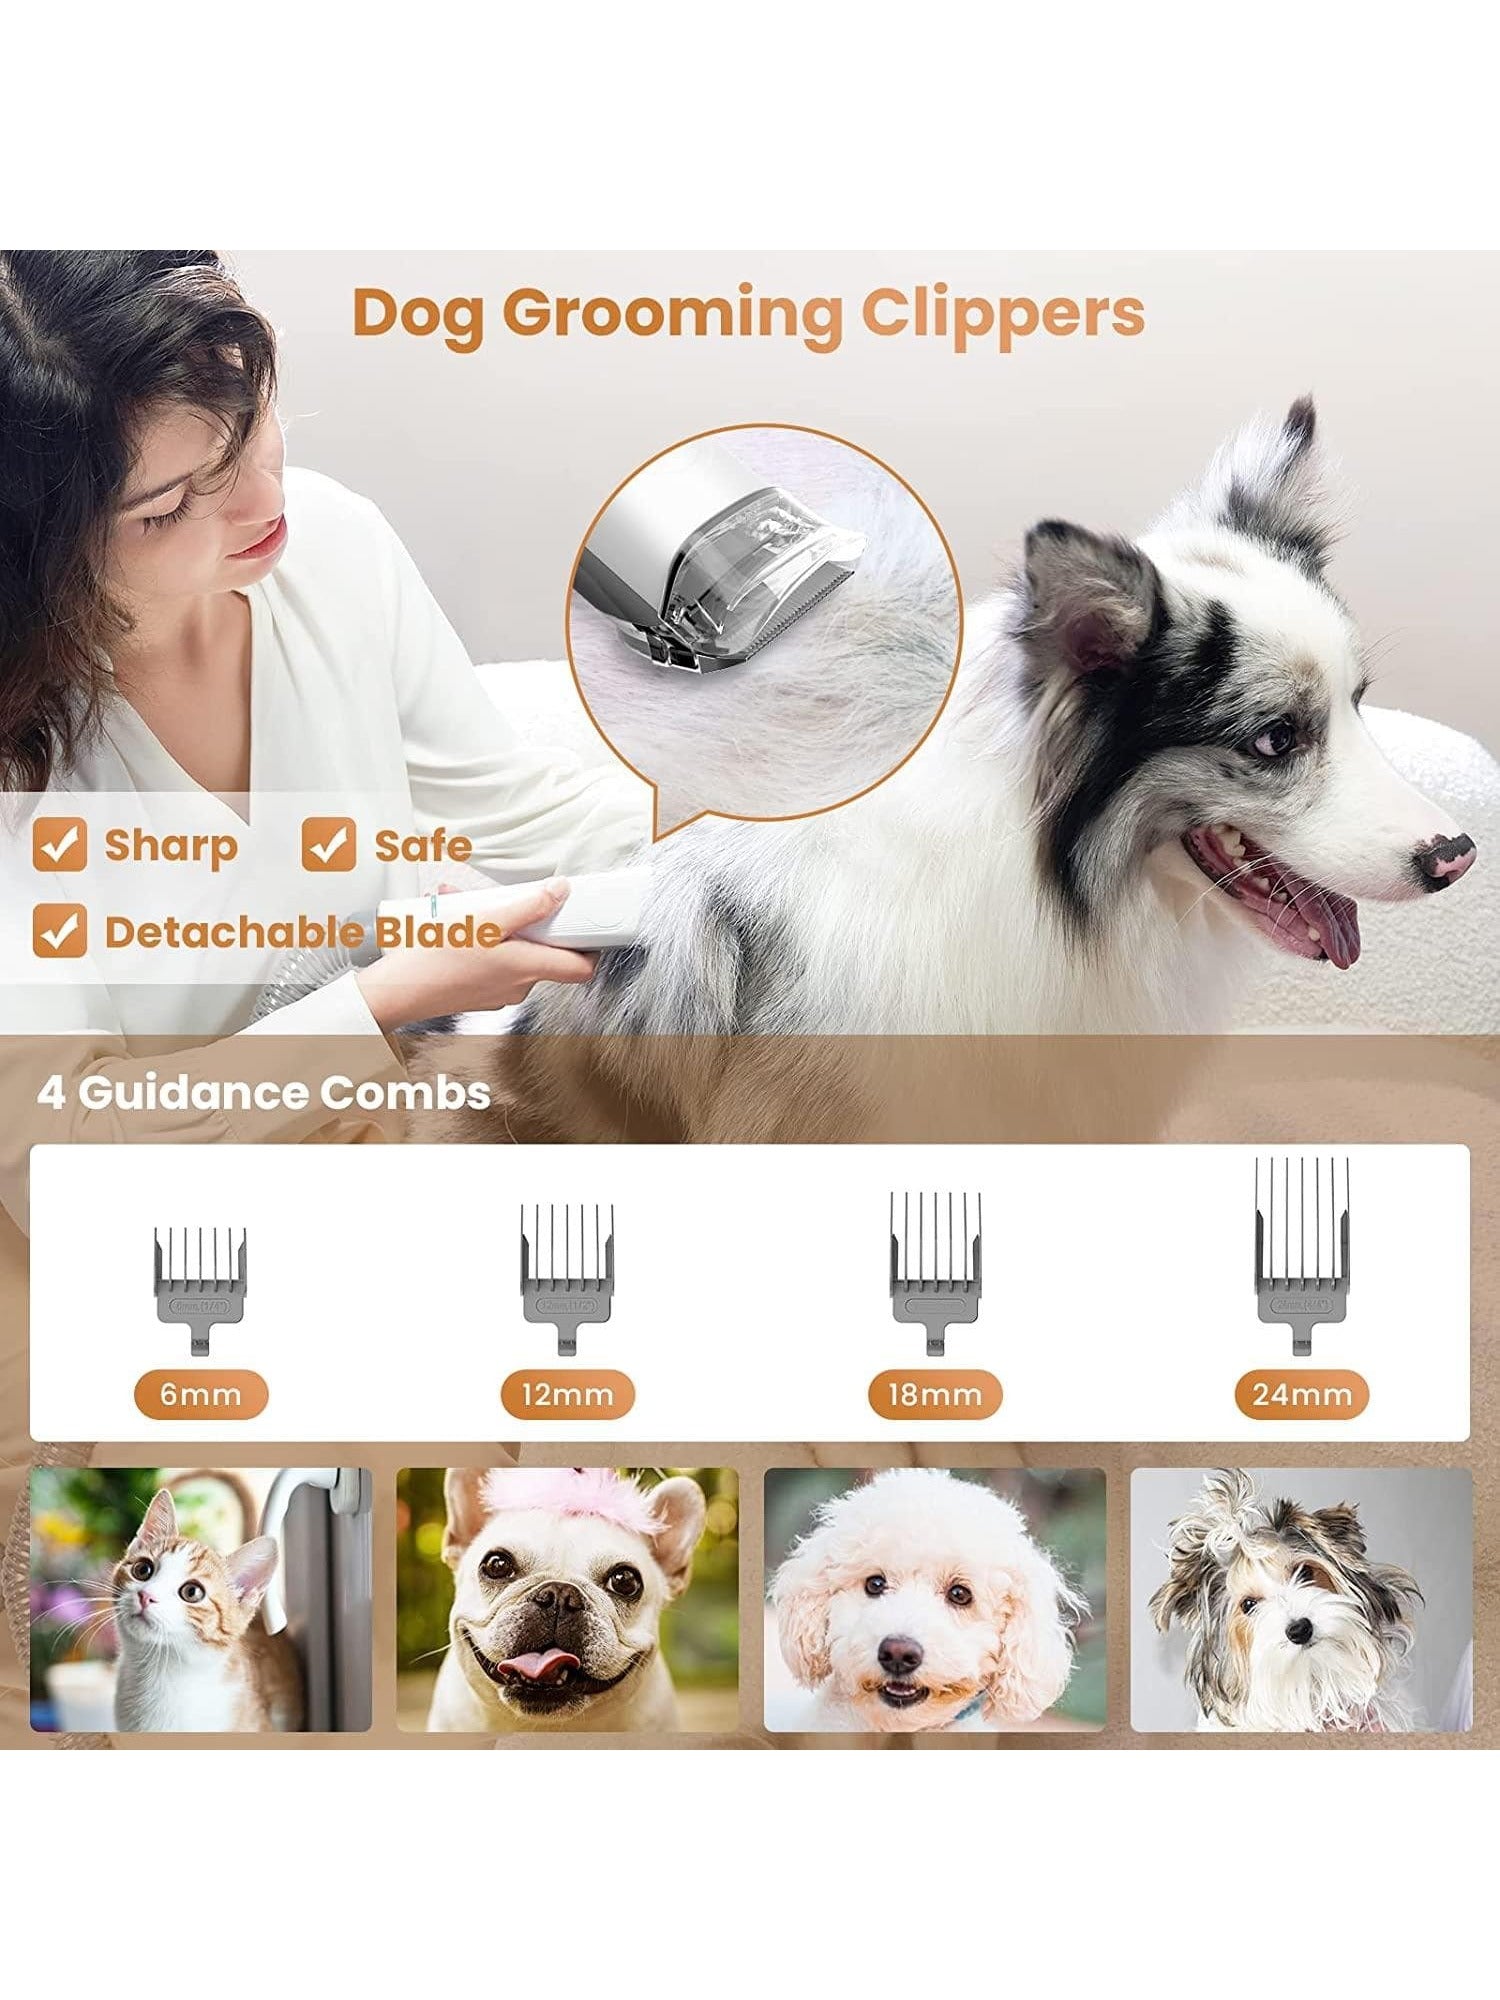 INSE P20 Pro Pet Grooming Vacuum & Dog Hair Vacuum Suck in 99% Pet Hair, Professional Dog Grooming Kit with 5 Grooming Tools,Large Easy Empty Dust Box, Dog Brush Vacuum for Shedding Dogs Cats Hair